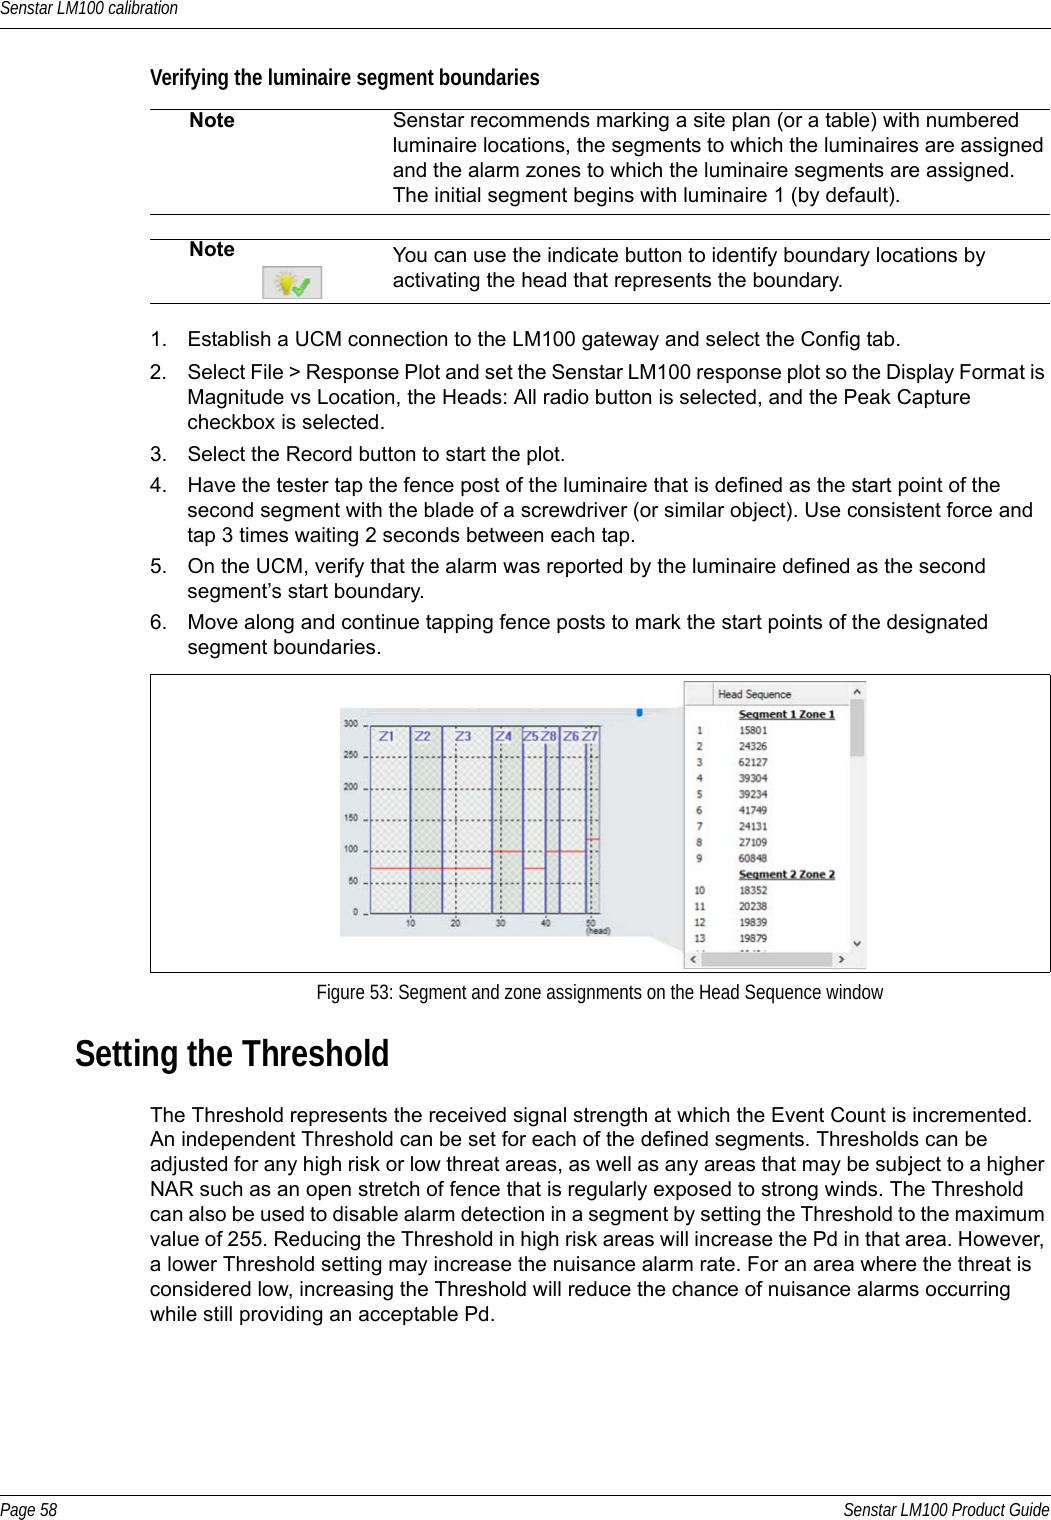 Senstar LM100 calibrationPage 58 Senstar LM100 Product GuideVerifying the luminaire segment boundaries  1. Establish a UCM connection to the LM100 gateway and select the Config tab.2. Select File &gt; Response Plot and set the Senstar LM100 response plot so the Display Format is Magnitude vs Location, the Heads: All radio button is selected, and the Peak Capture checkbox is selected. 3. Select the Record button to start the plot. 4. Have the tester tap the fence post of the luminaire that is defined as the start point of the second segment with the blade of a screwdriver (or similar object). Use consistent force and tap 3 times waiting 2 seconds between each tap.5. On the UCM, verify that the alarm was reported by the luminaire defined as the second segment’s start boundary. 6. Move along and continue tapping fence posts to mark the start points of the designated segment boundaries.Setting the ThresholdThe Threshold represents the received signal strength at which the Event Count is incremented. An independent Threshold can be set for each of the defined segments. Thresholds can be adjusted for any high risk or low threat areas, as well as any areas that may be subject to a higher NAR such as an open stretch of fence that is regularly exposed to strong winds. The Threshold can also be used to disable alarm detection in a segment by setting the Threshold to the maximum value of 255. Reducing the Threshold in high risk areas will increase the Pd in that area. However, a lower Threshold setting may increase the nuisance alarm rate. For an area where the threat is considered low, increasing the Threshold will reduce the chance of nuisance alarms occurring while still providing an acceptable Pd.Note Senstar recommends marking a site plan (or a table) with numbered luminaire locations, the segments to which the luminaires are assigned and the alarm zones to which the luminaire segments are assigned.The initial segment begins with luminaire 1 (by default).Note You can use the indicate button to identify boundary locations by activating the head that represents the boundary.Figure 53: Segment and zone assignments on the Head Sequence window